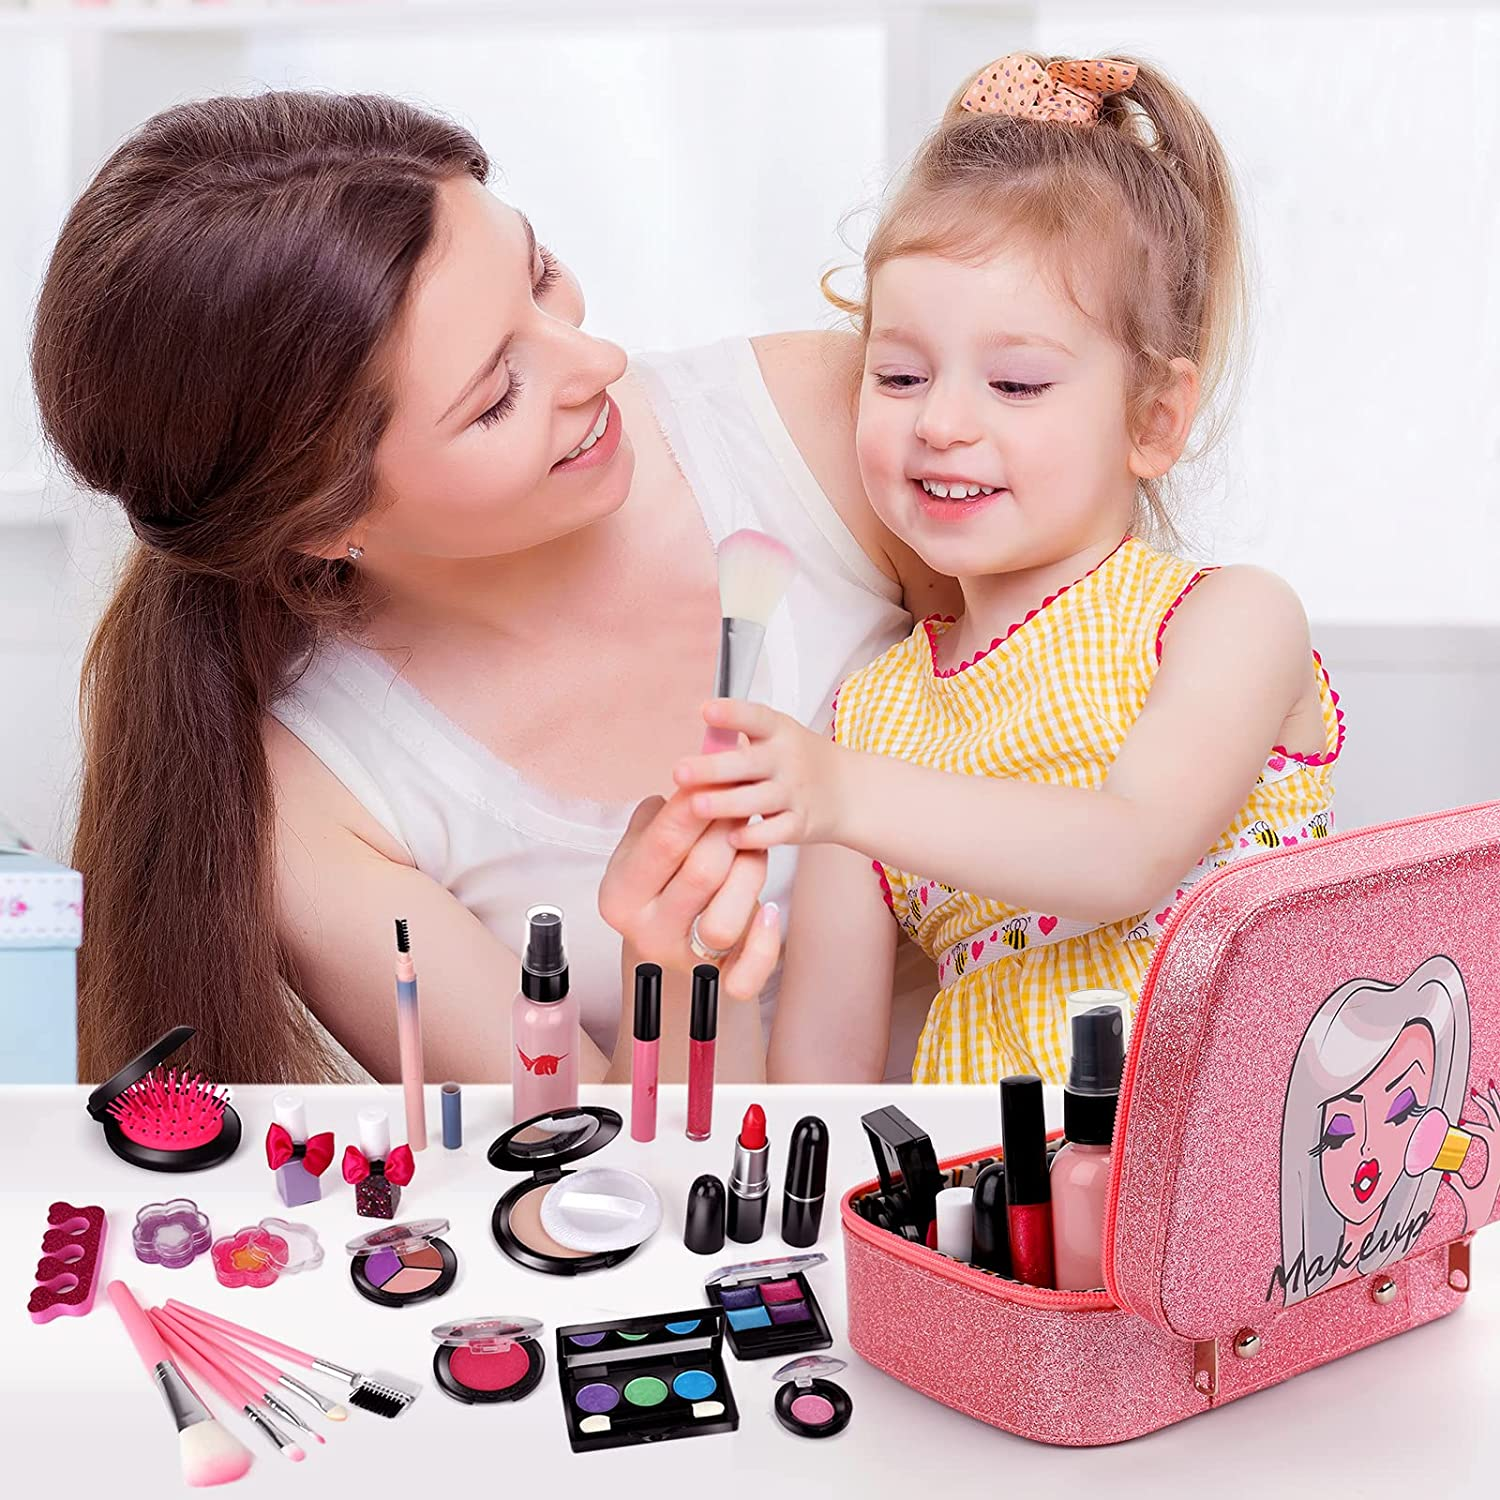 Flybay Kids Kit de maquillage pour fille, Maquillage Maroc